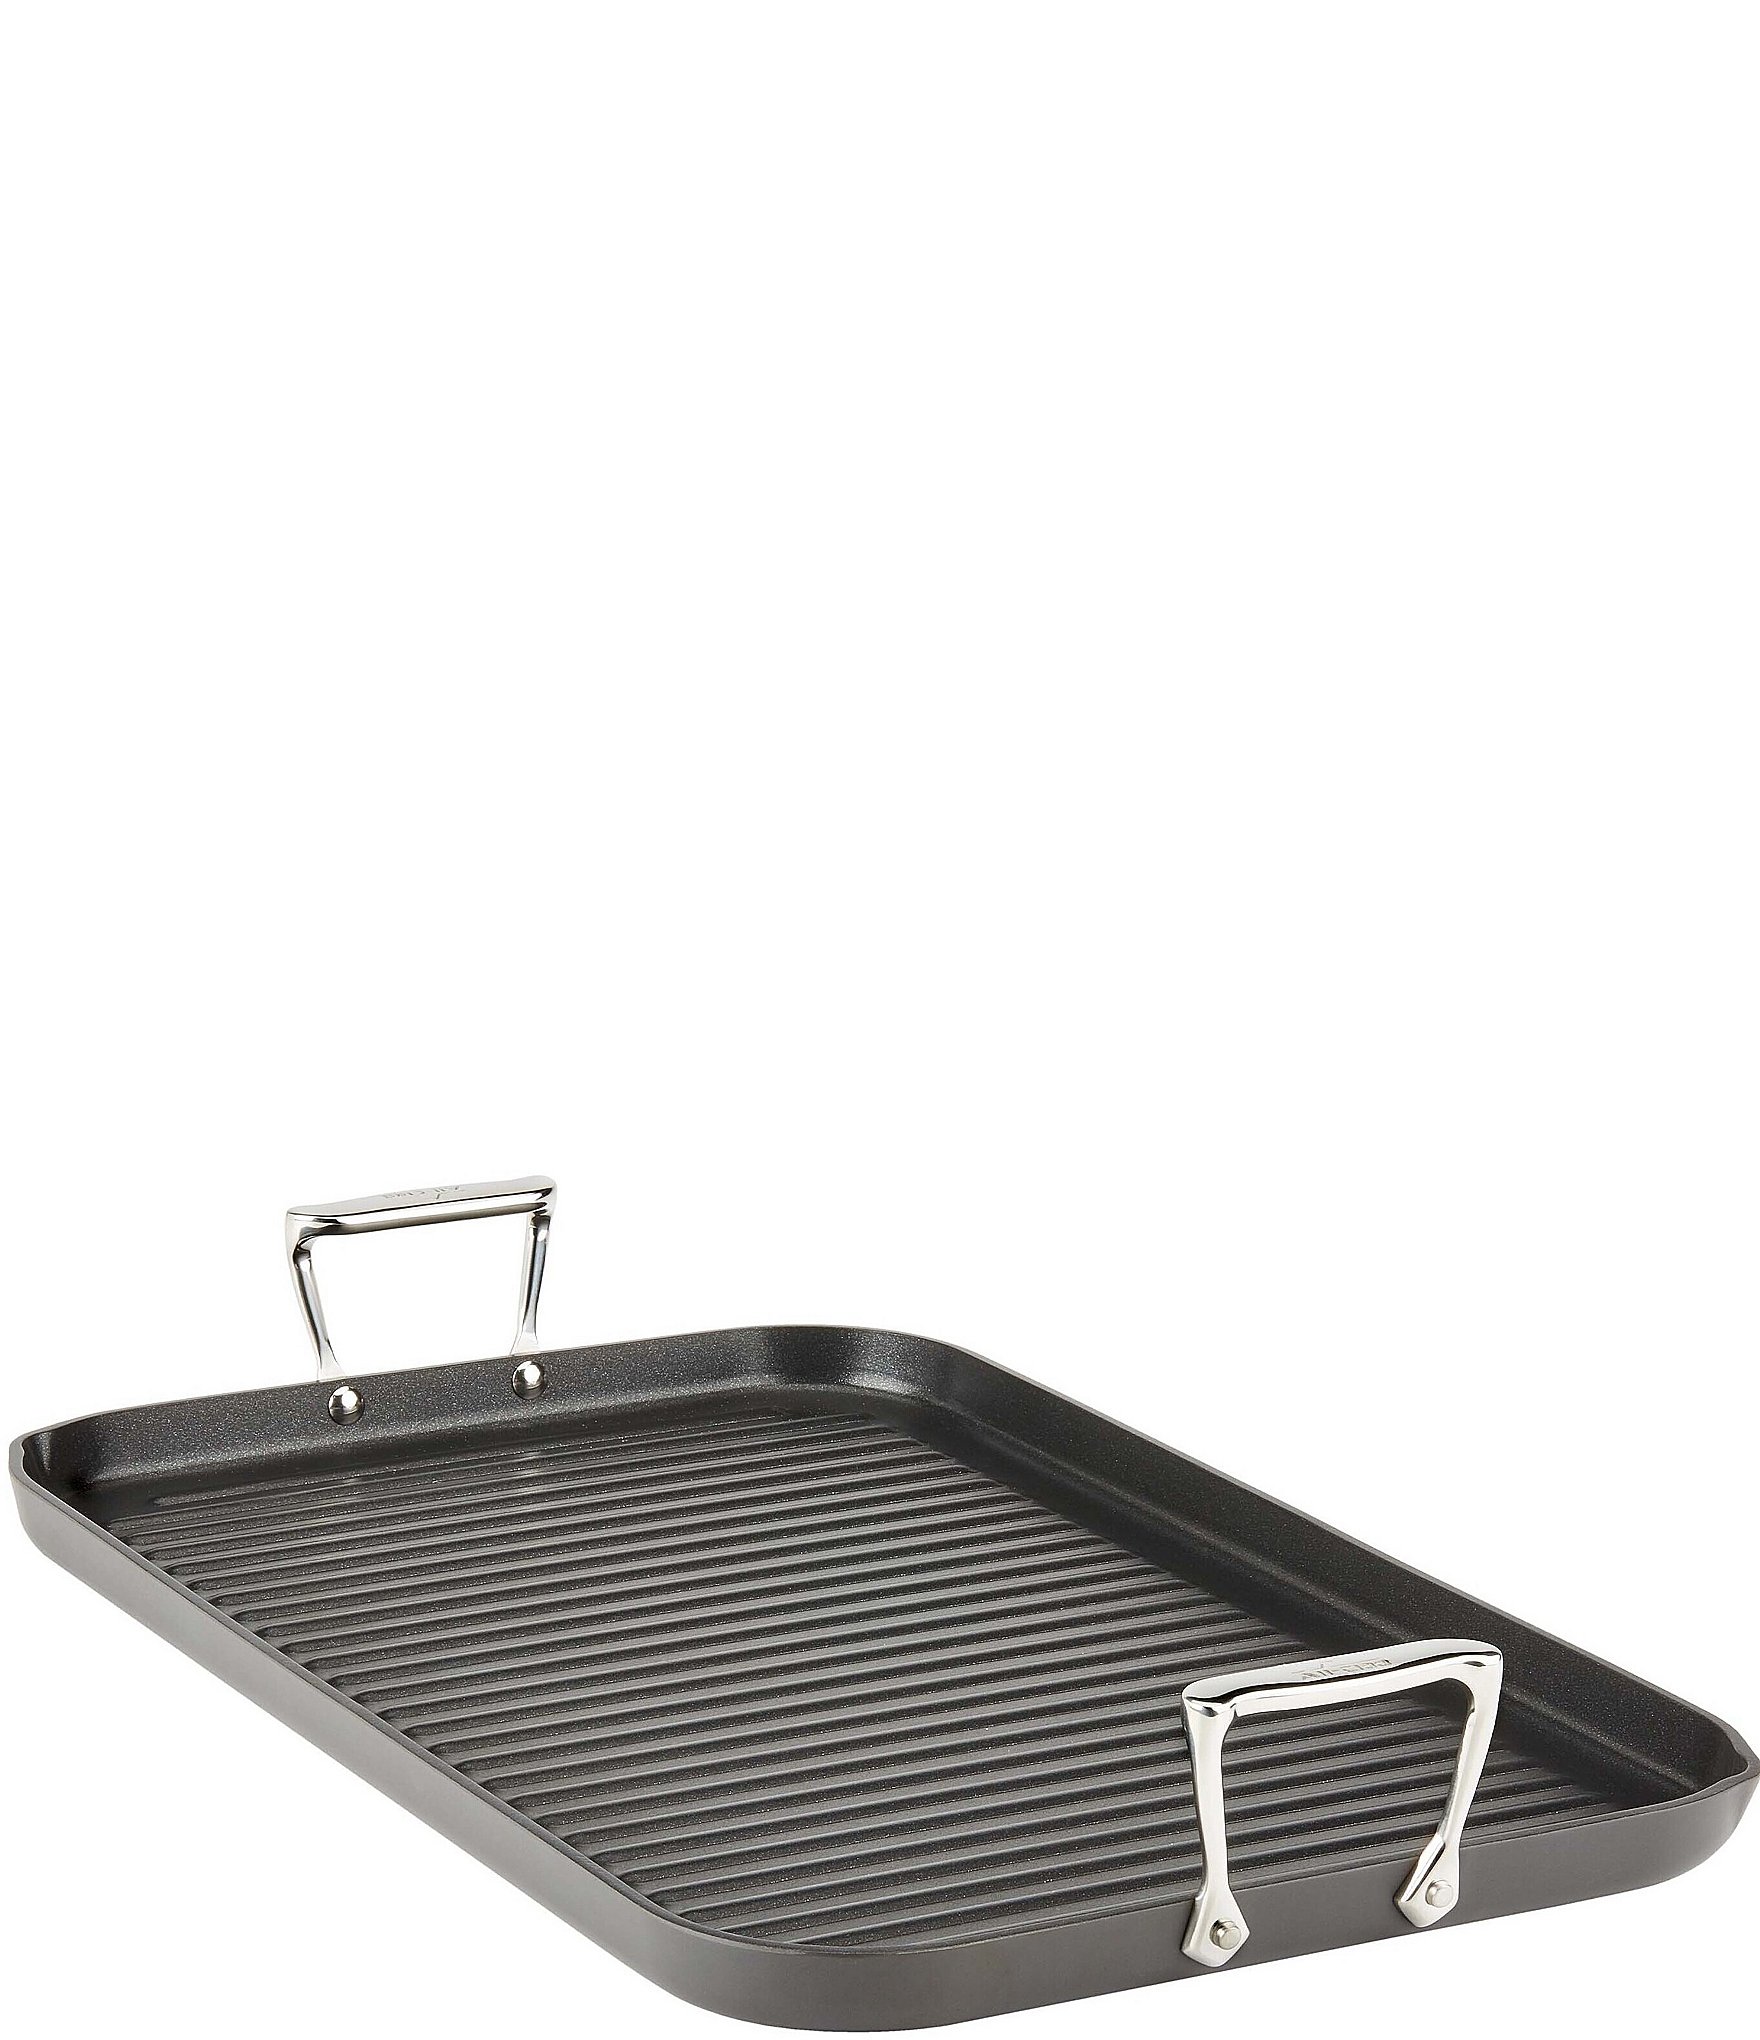 All-Clad Grill & Griddle Pans